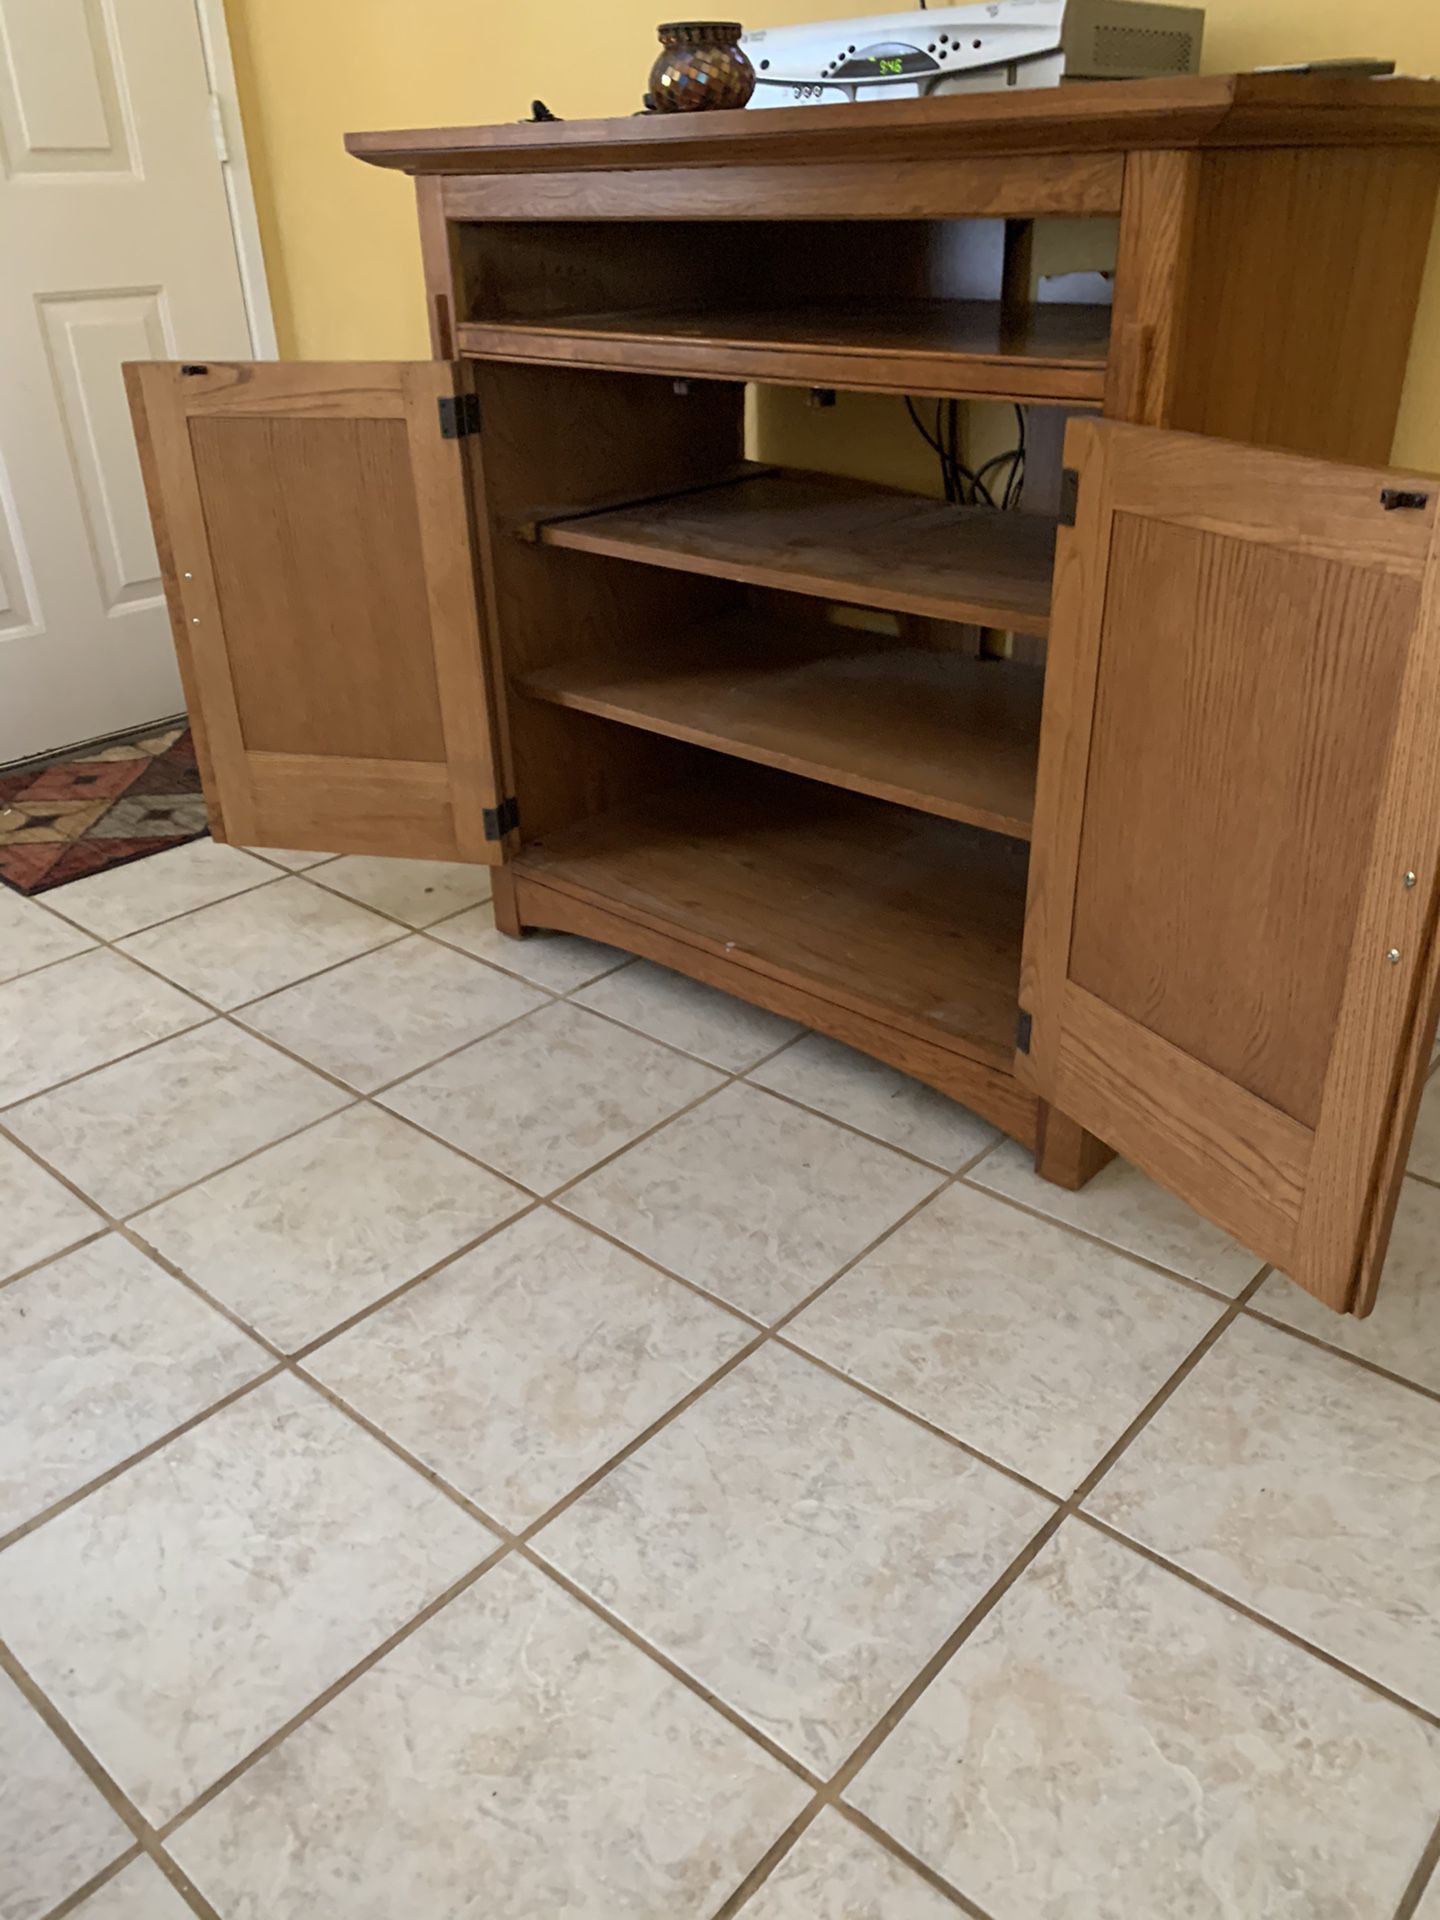 Cable box/stereo cabinet w pull out shelf and tile top